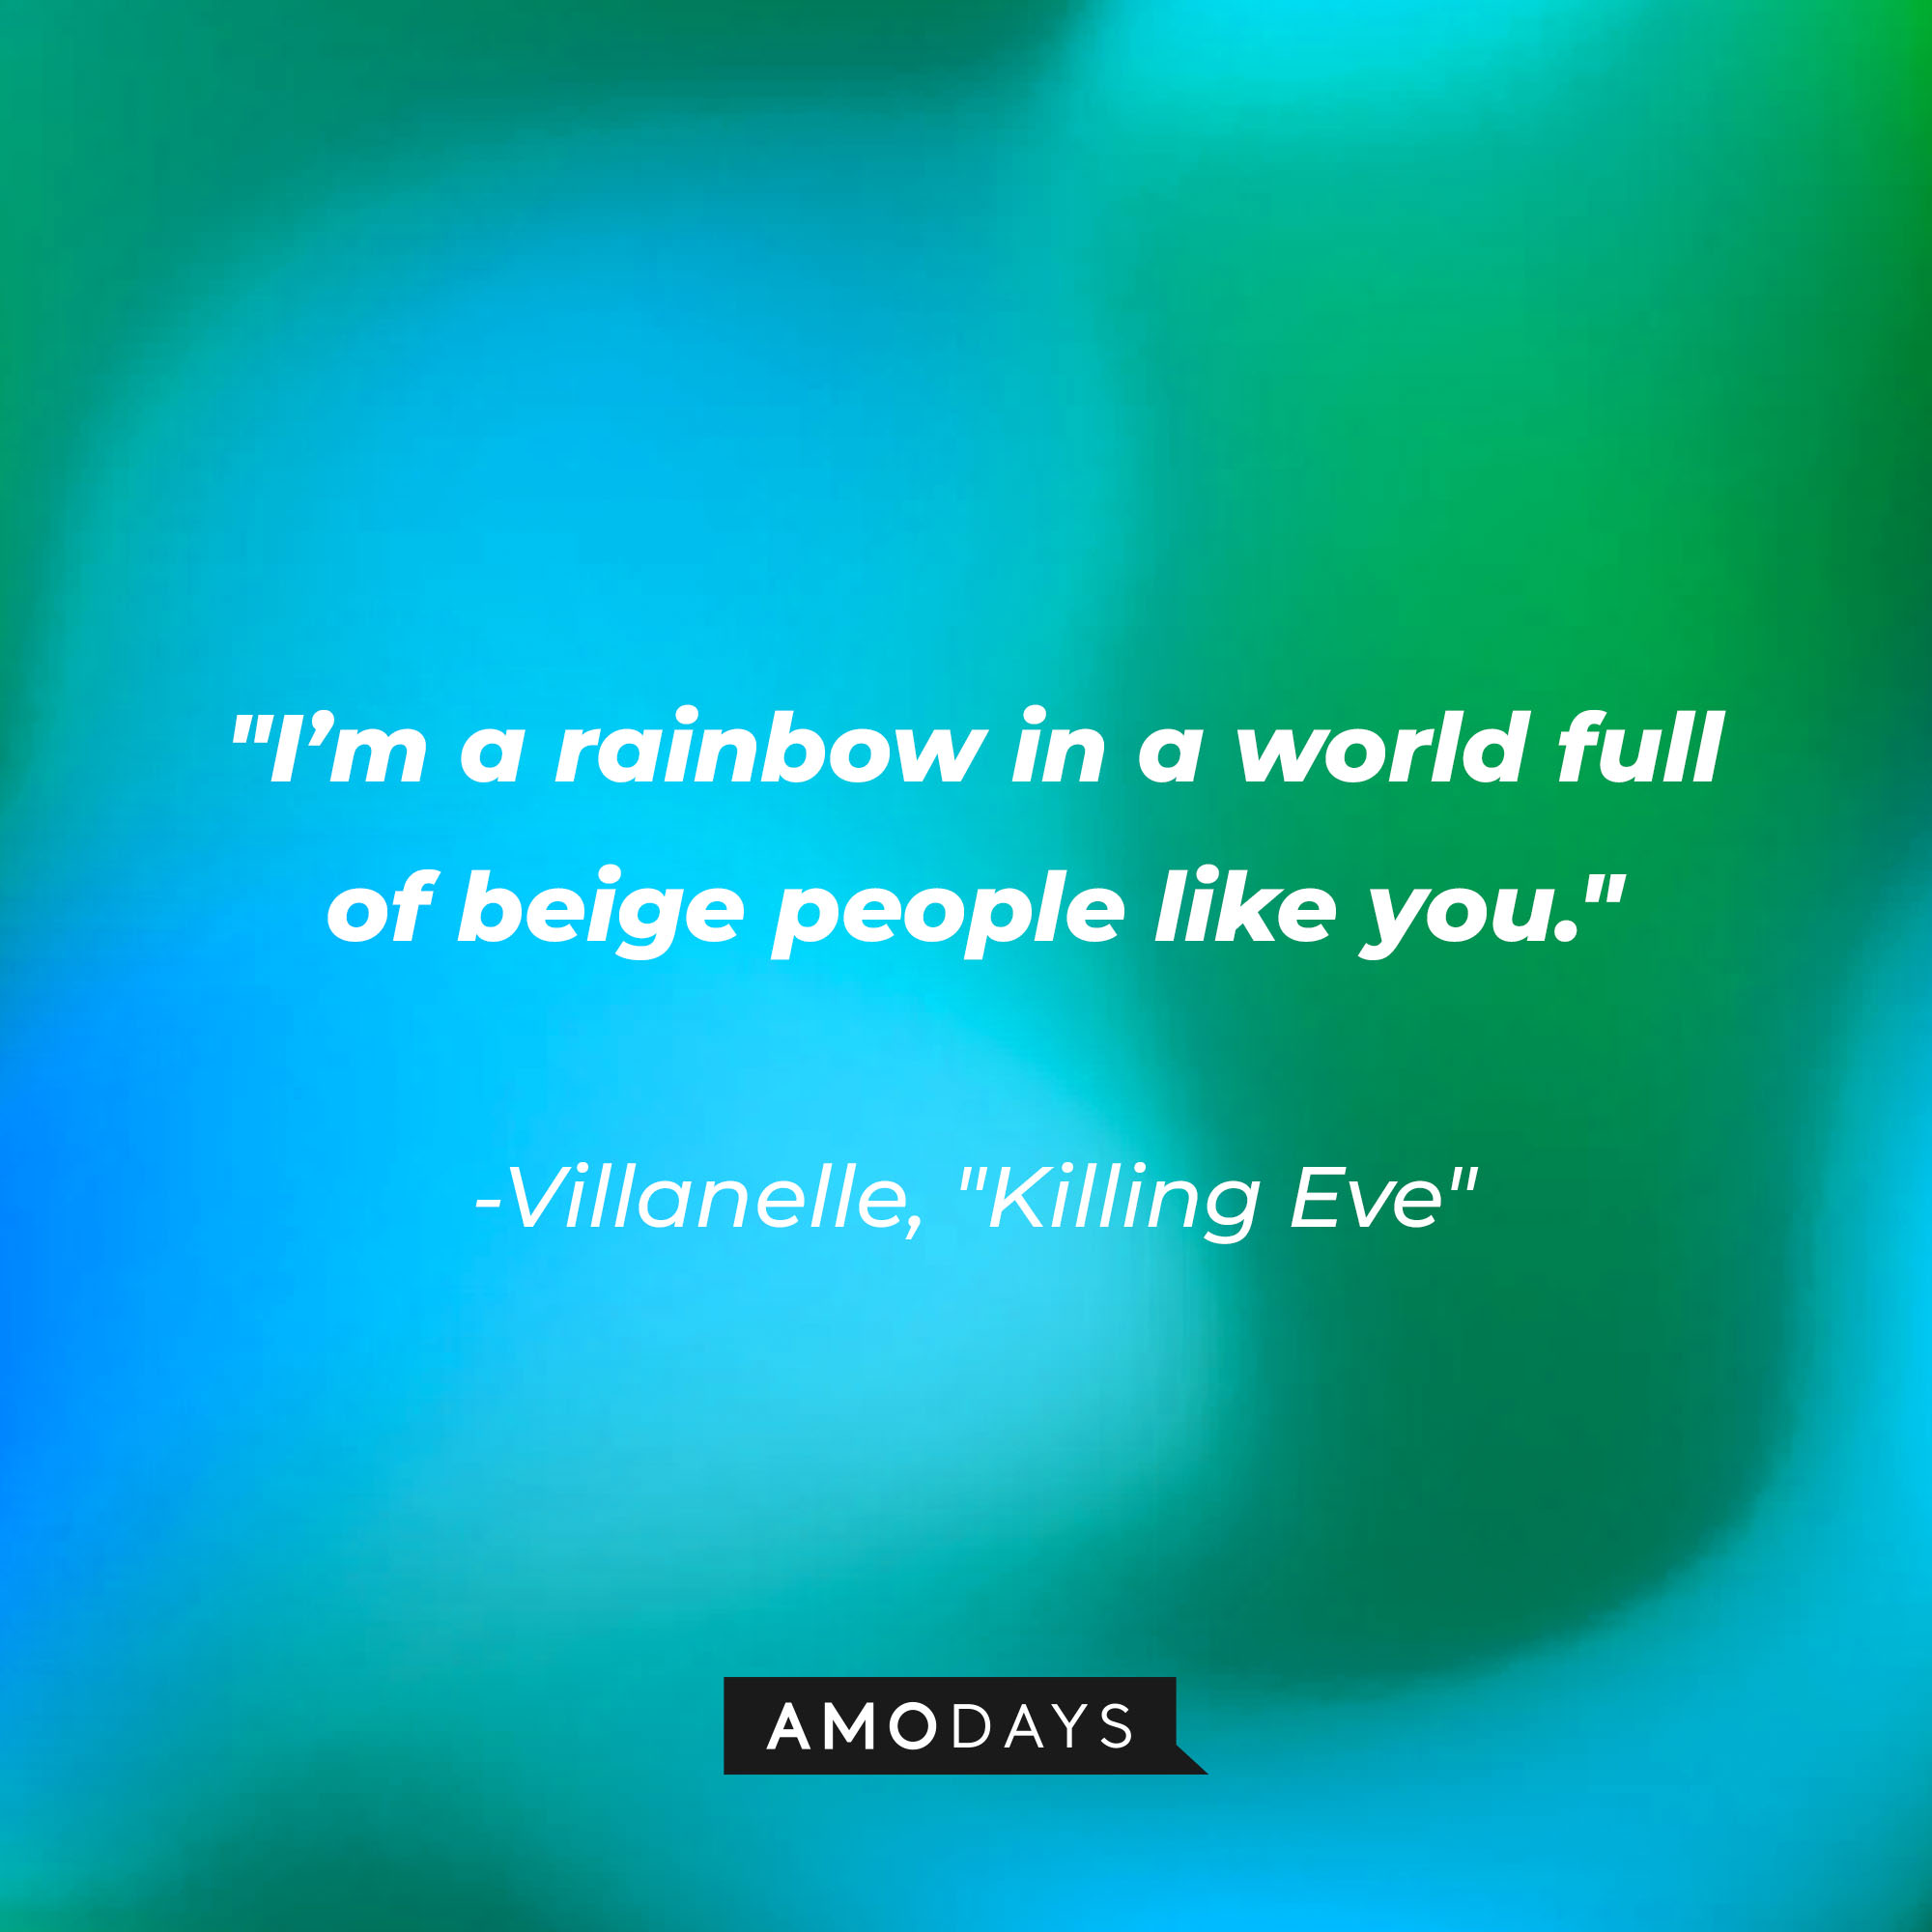 Villanelle's quote: "I’m a rainbow in a world full of beige people like you." | Source: Amodays